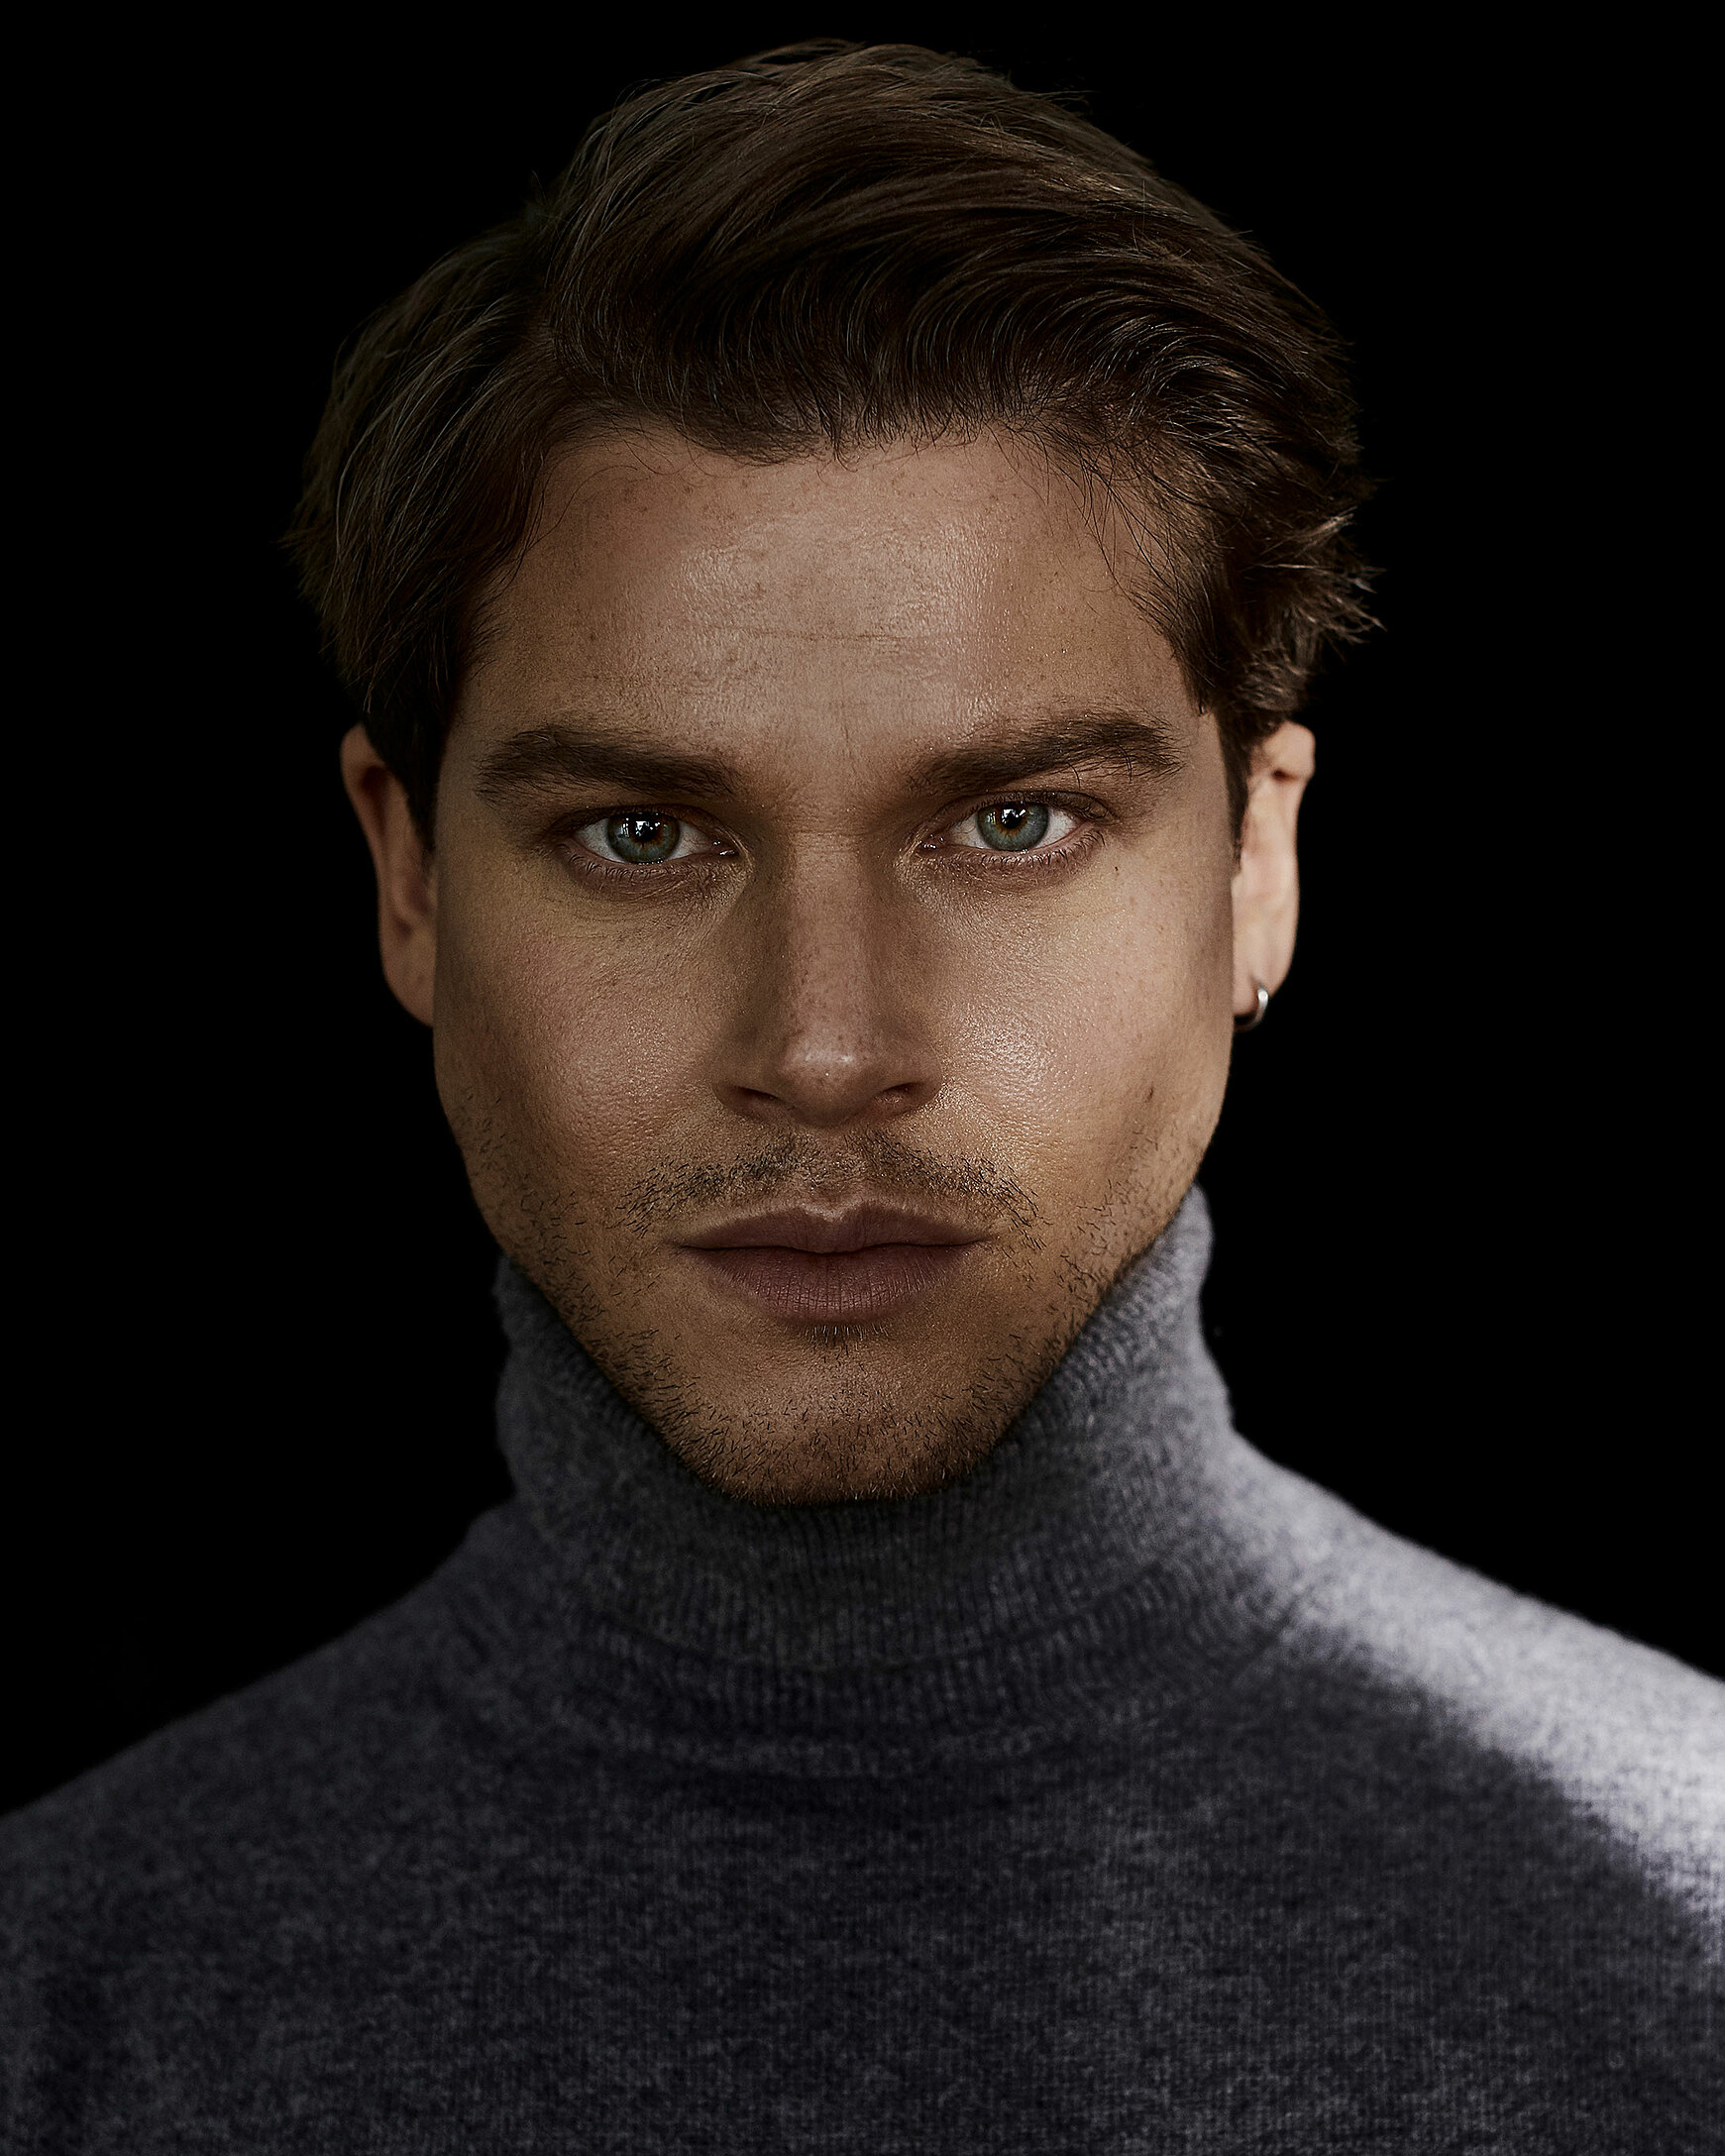 A portrait of a male model who wears a grey pullover with a turtle neck.